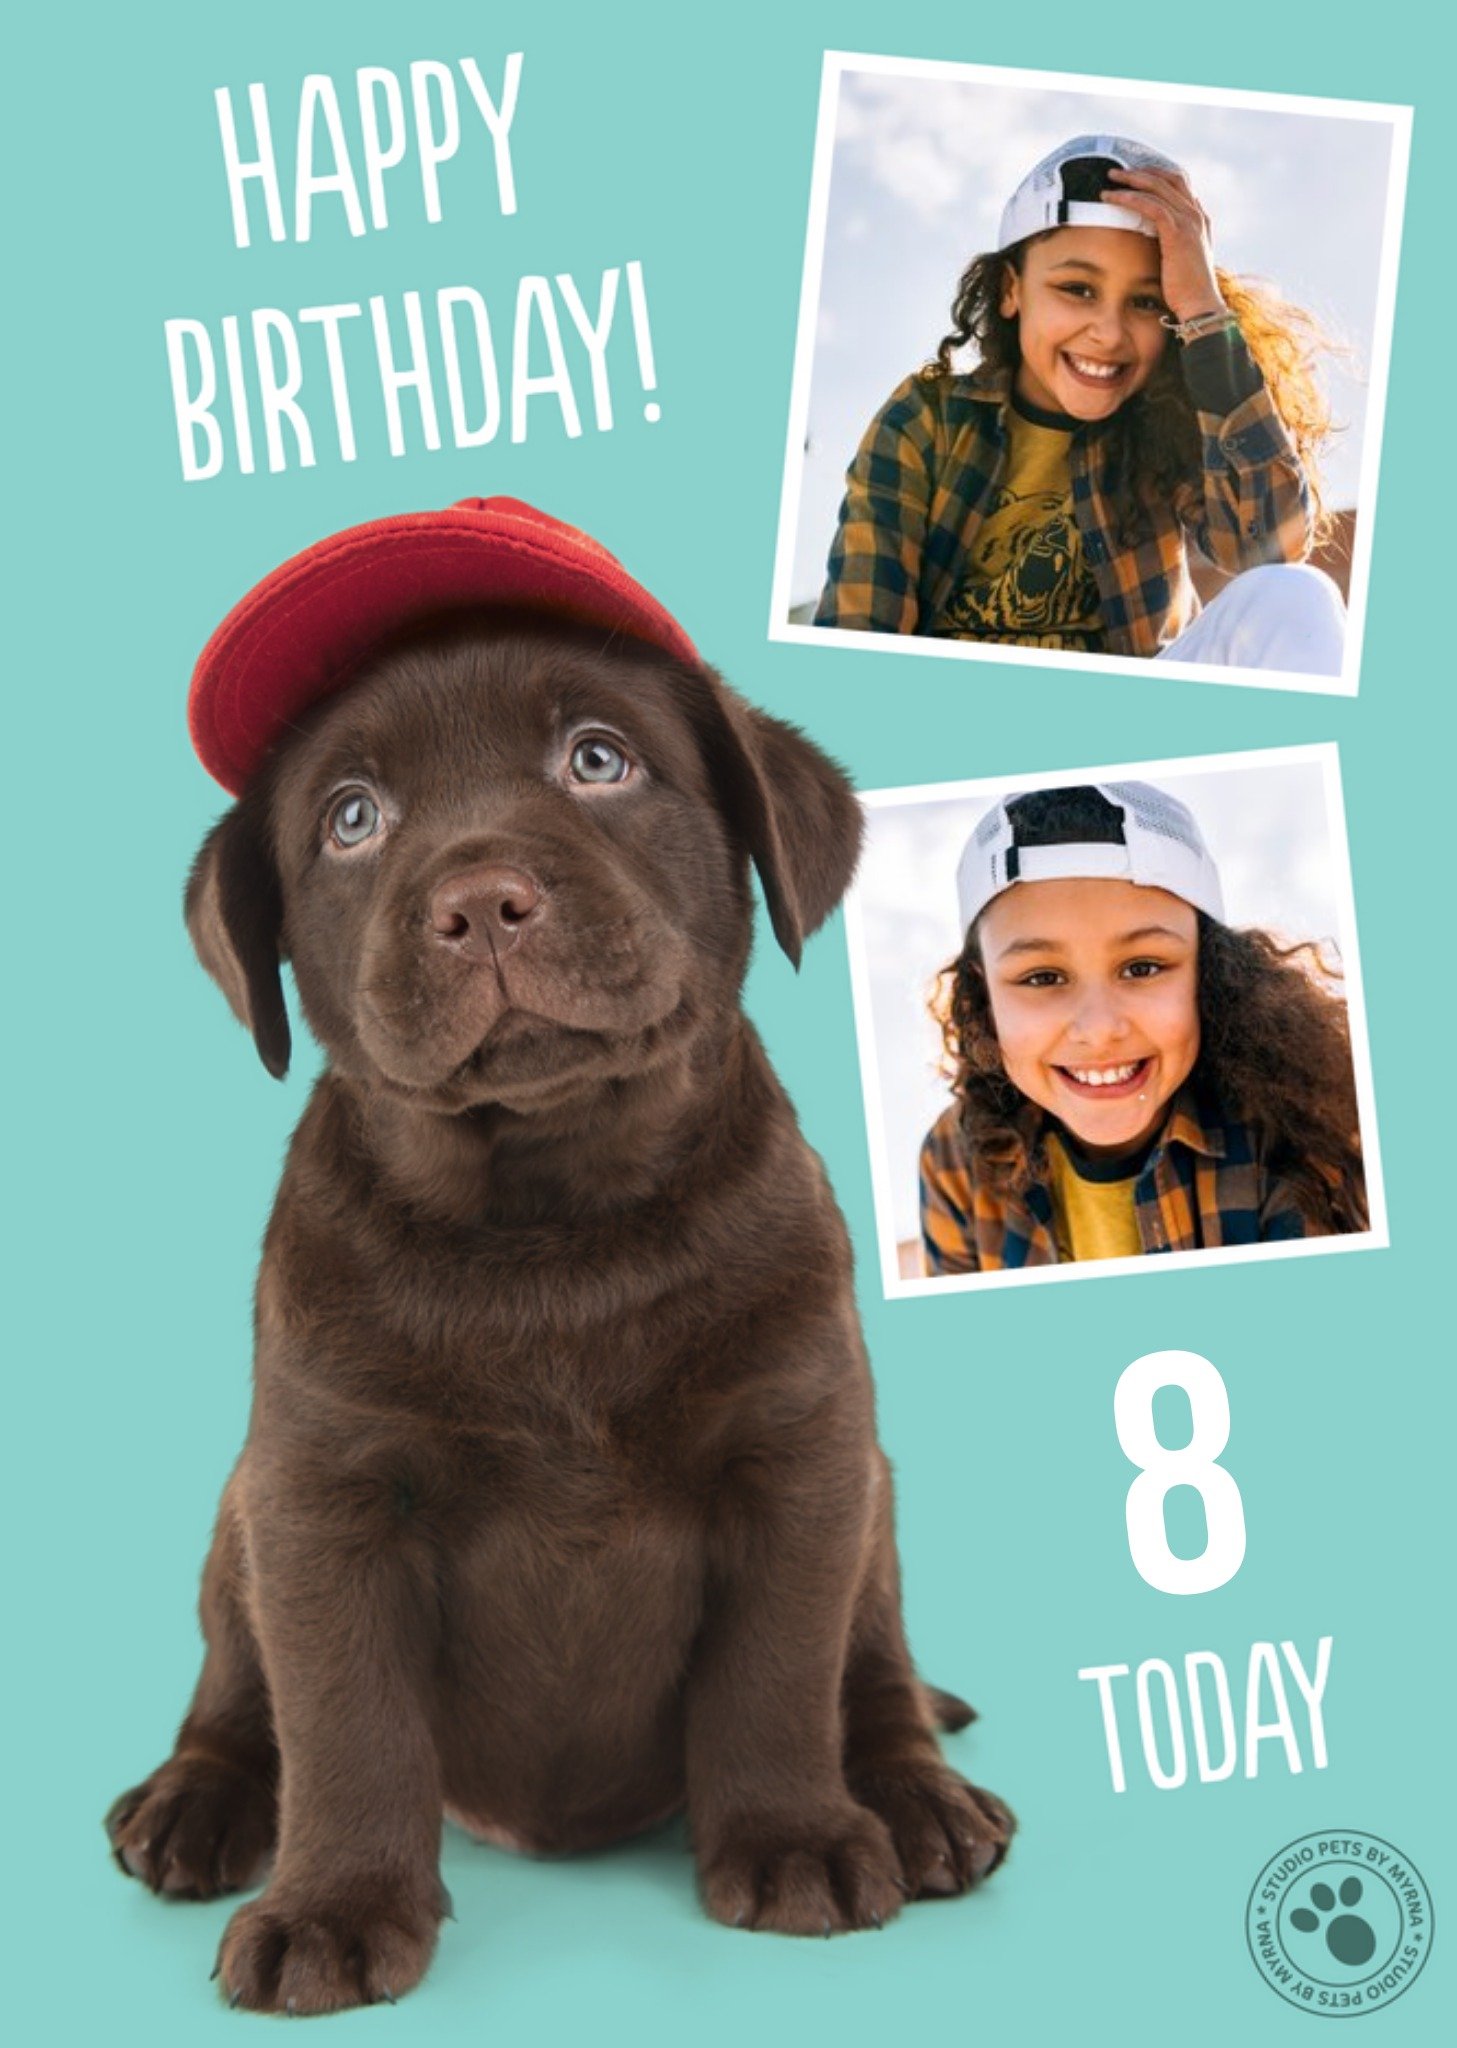 Studio Pets Puppy 8 Today Photo Upload Birthday Card, Large